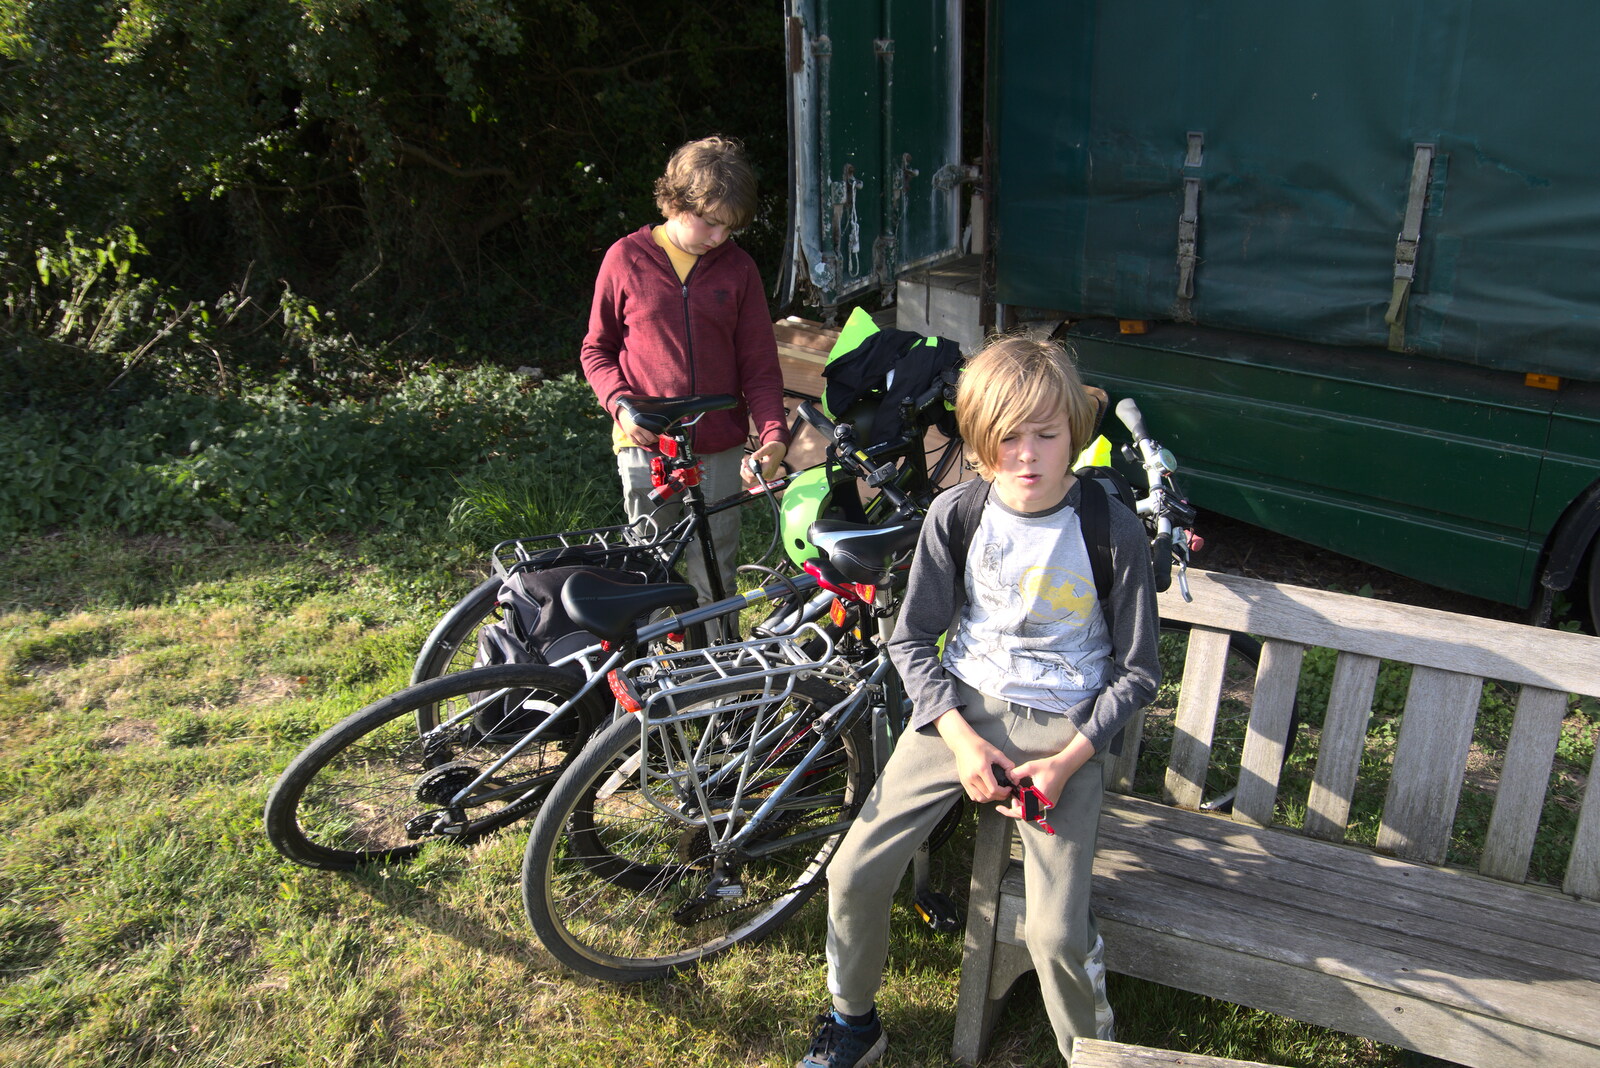 Fred and Harry by a pile of bikes from Camping in the Dunes, Waxham Sands, Norfolk - 9th July 2022